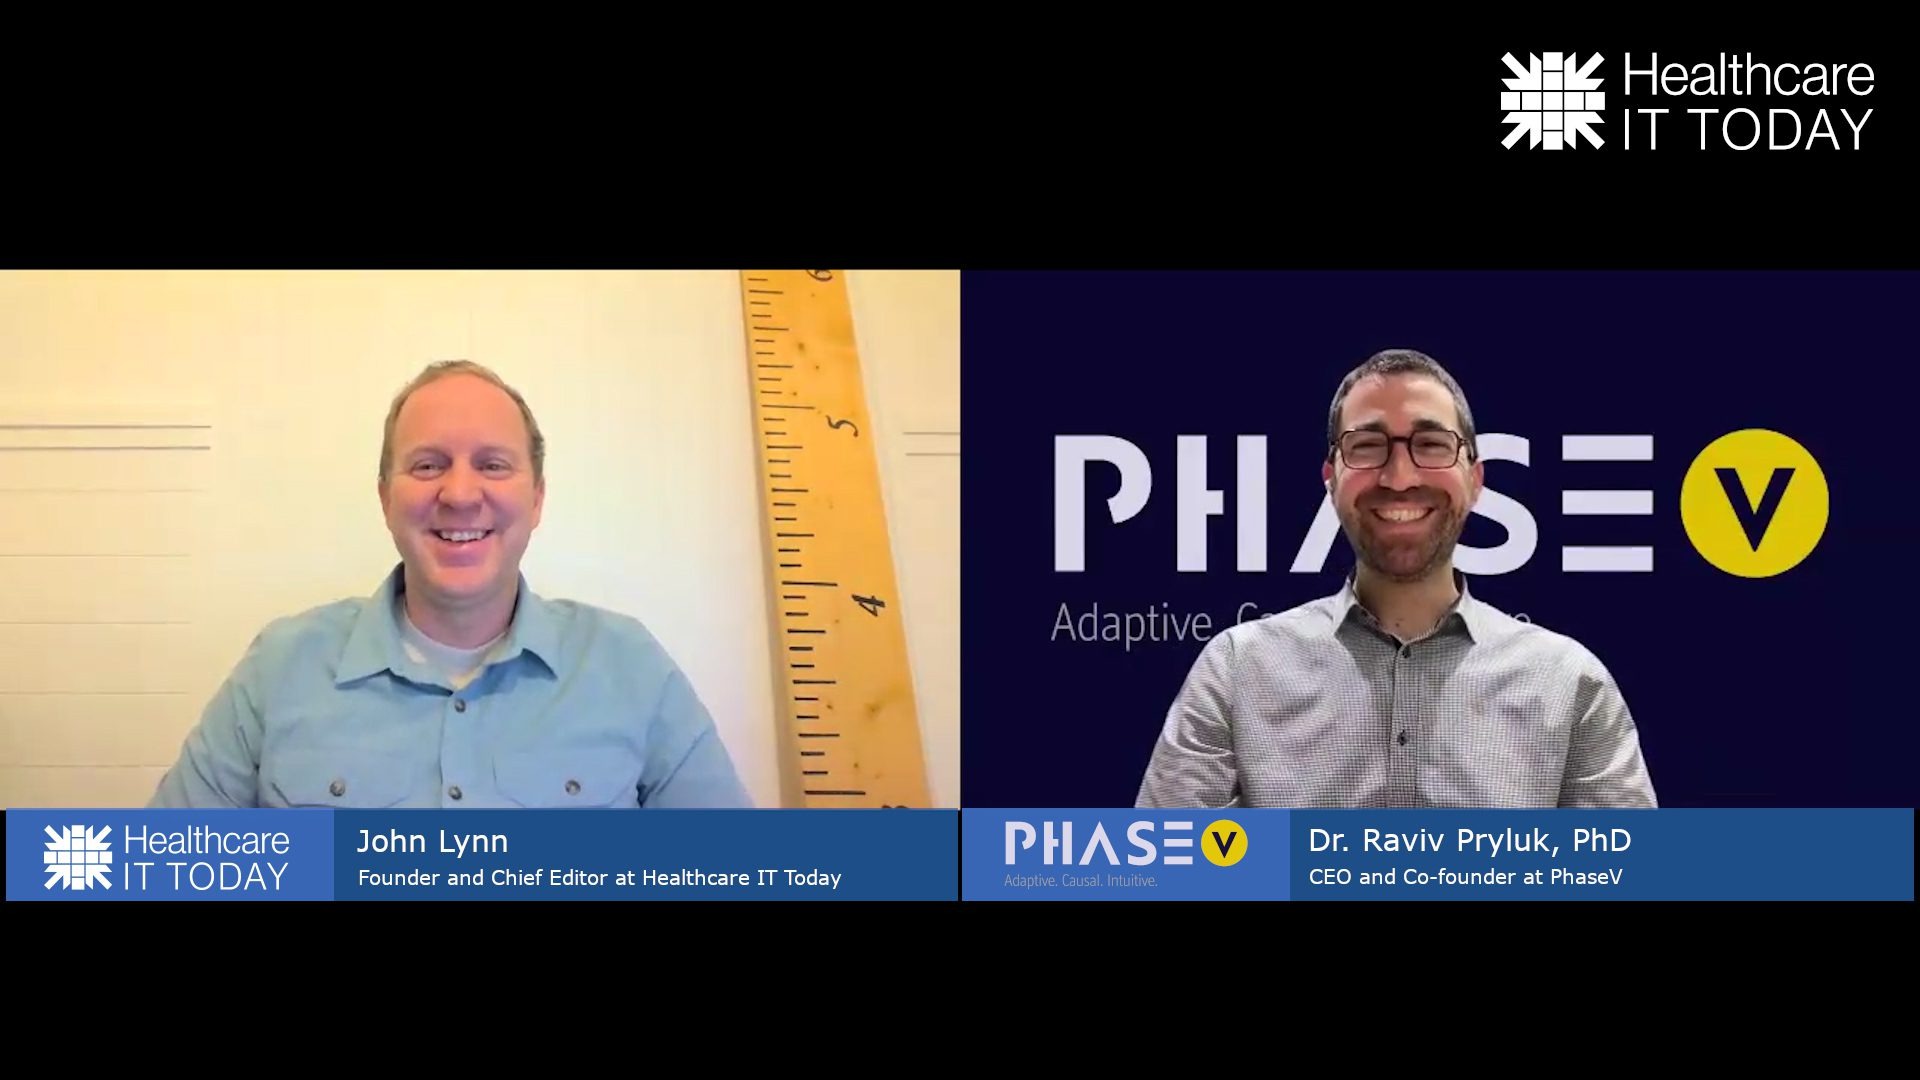 PhaseV Applies Machine Learning for Successful Clinical Trials